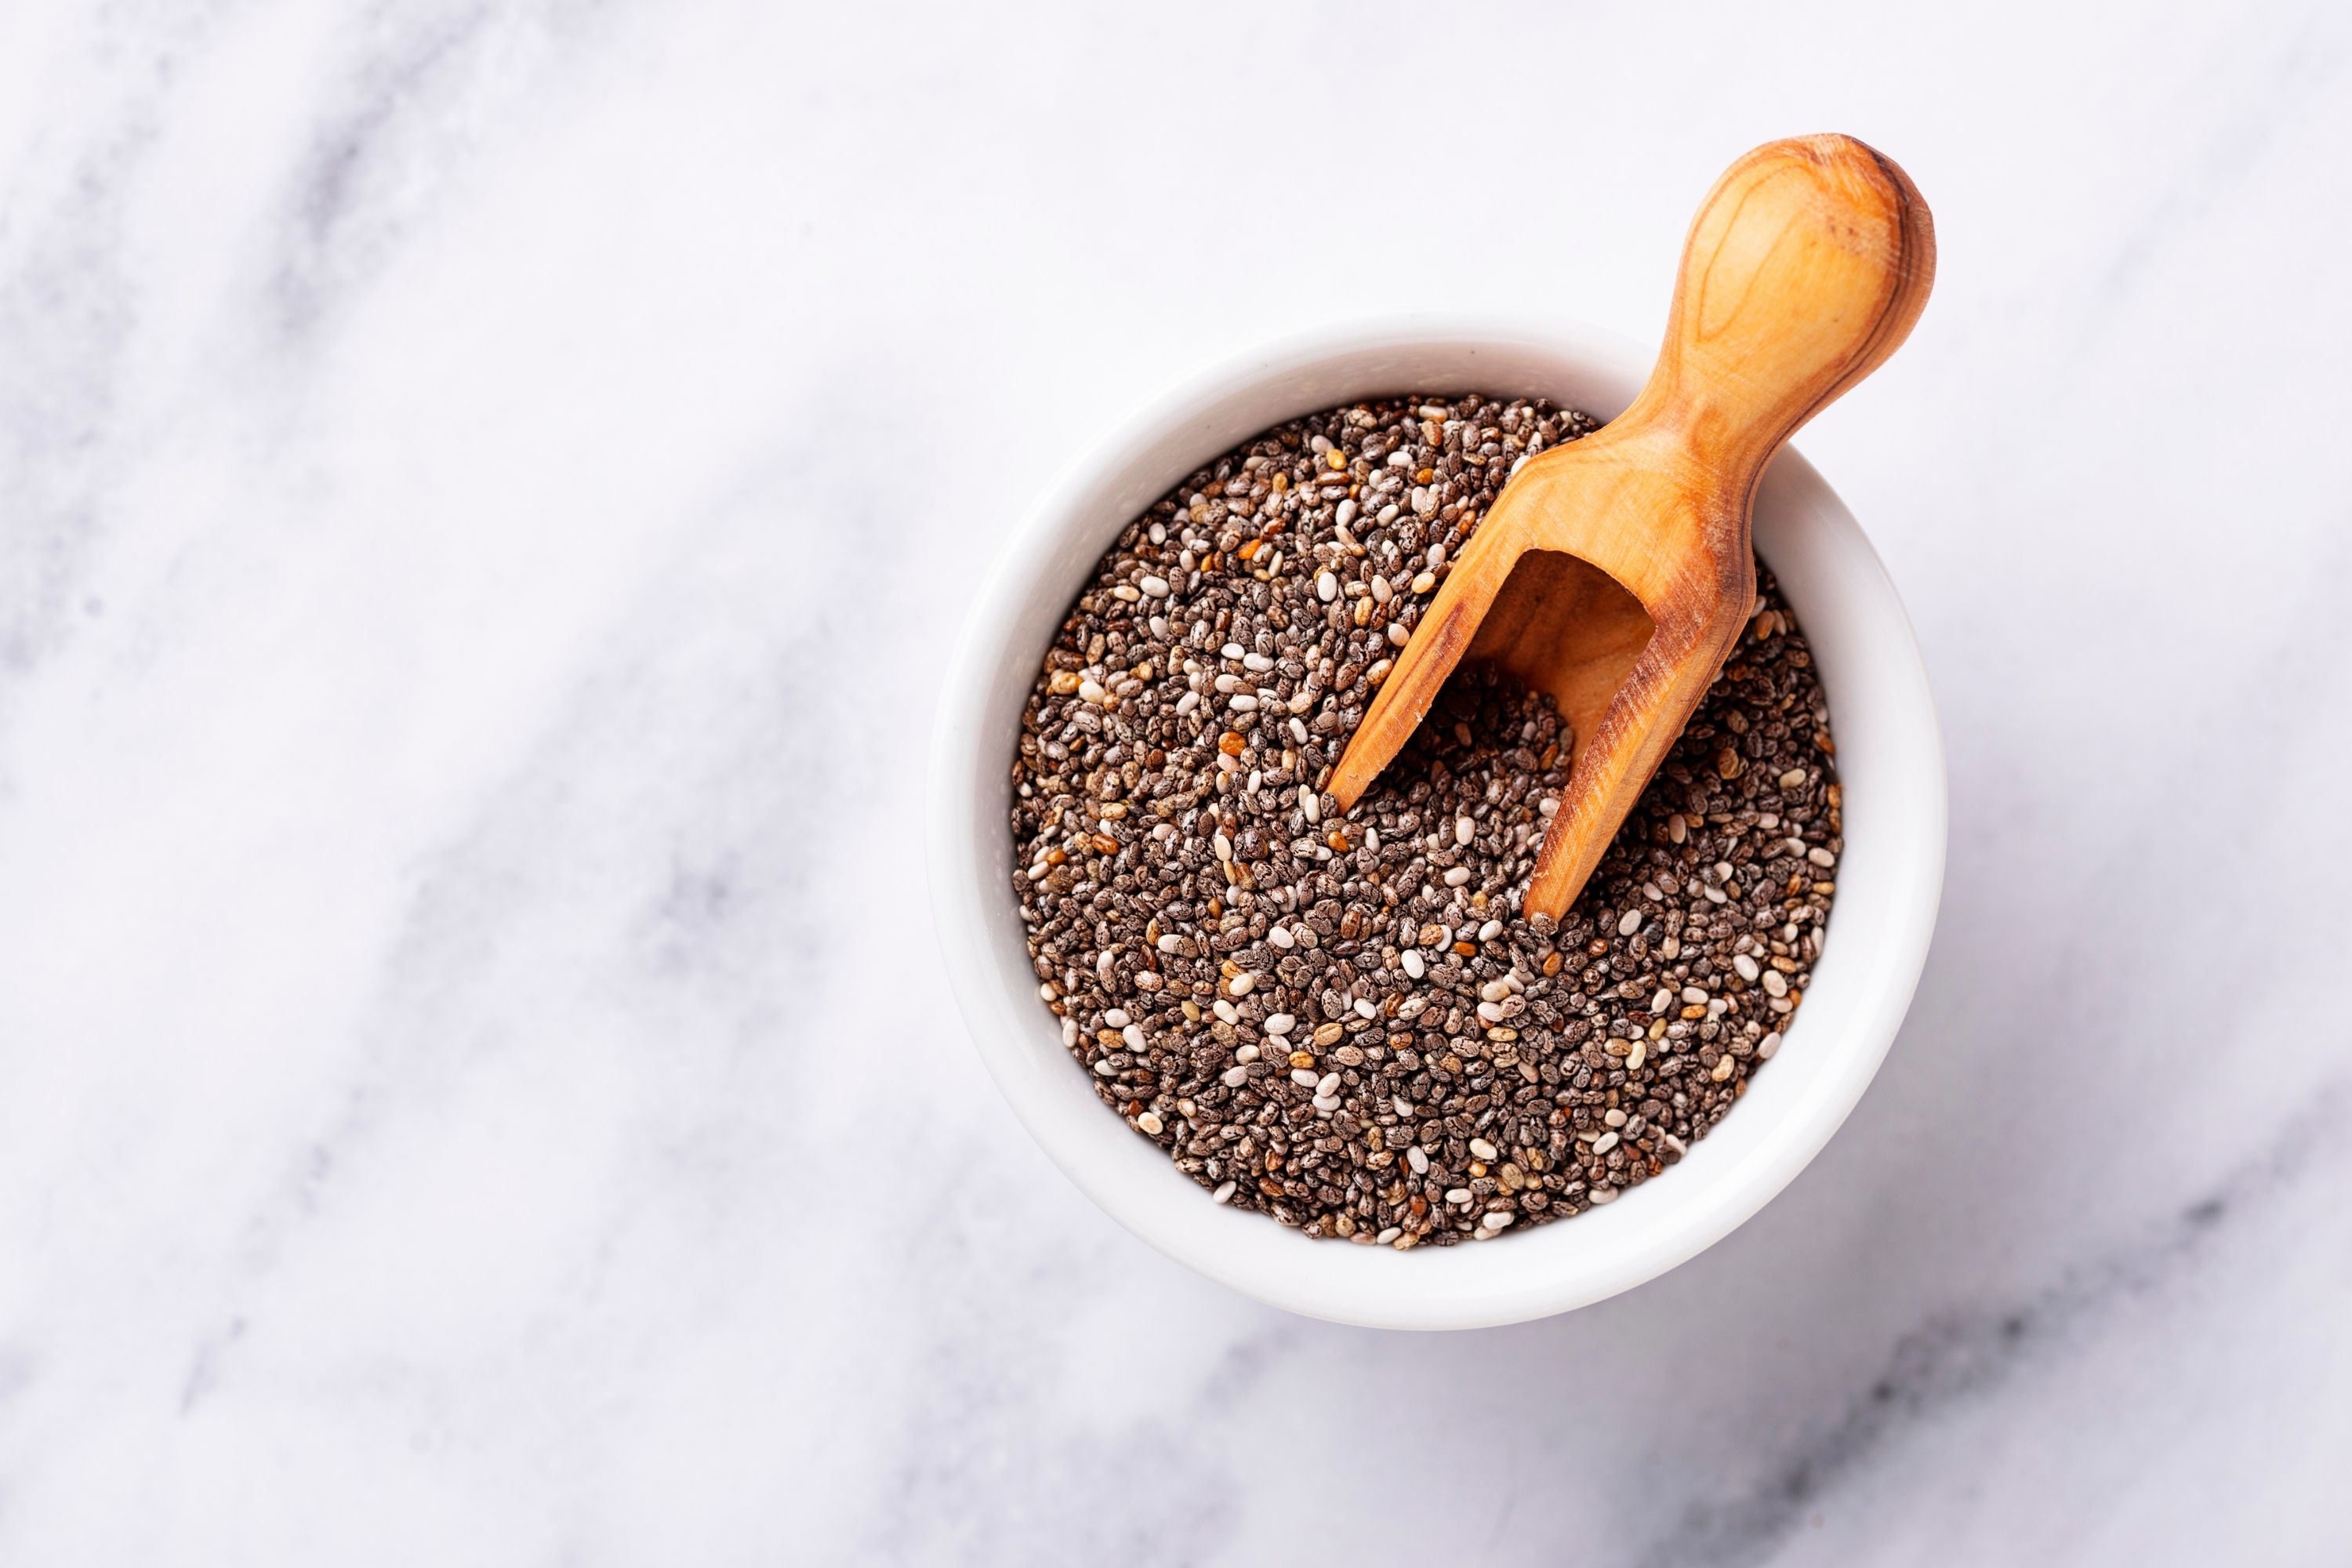 How to Tell If Chia Seeds Are Bad